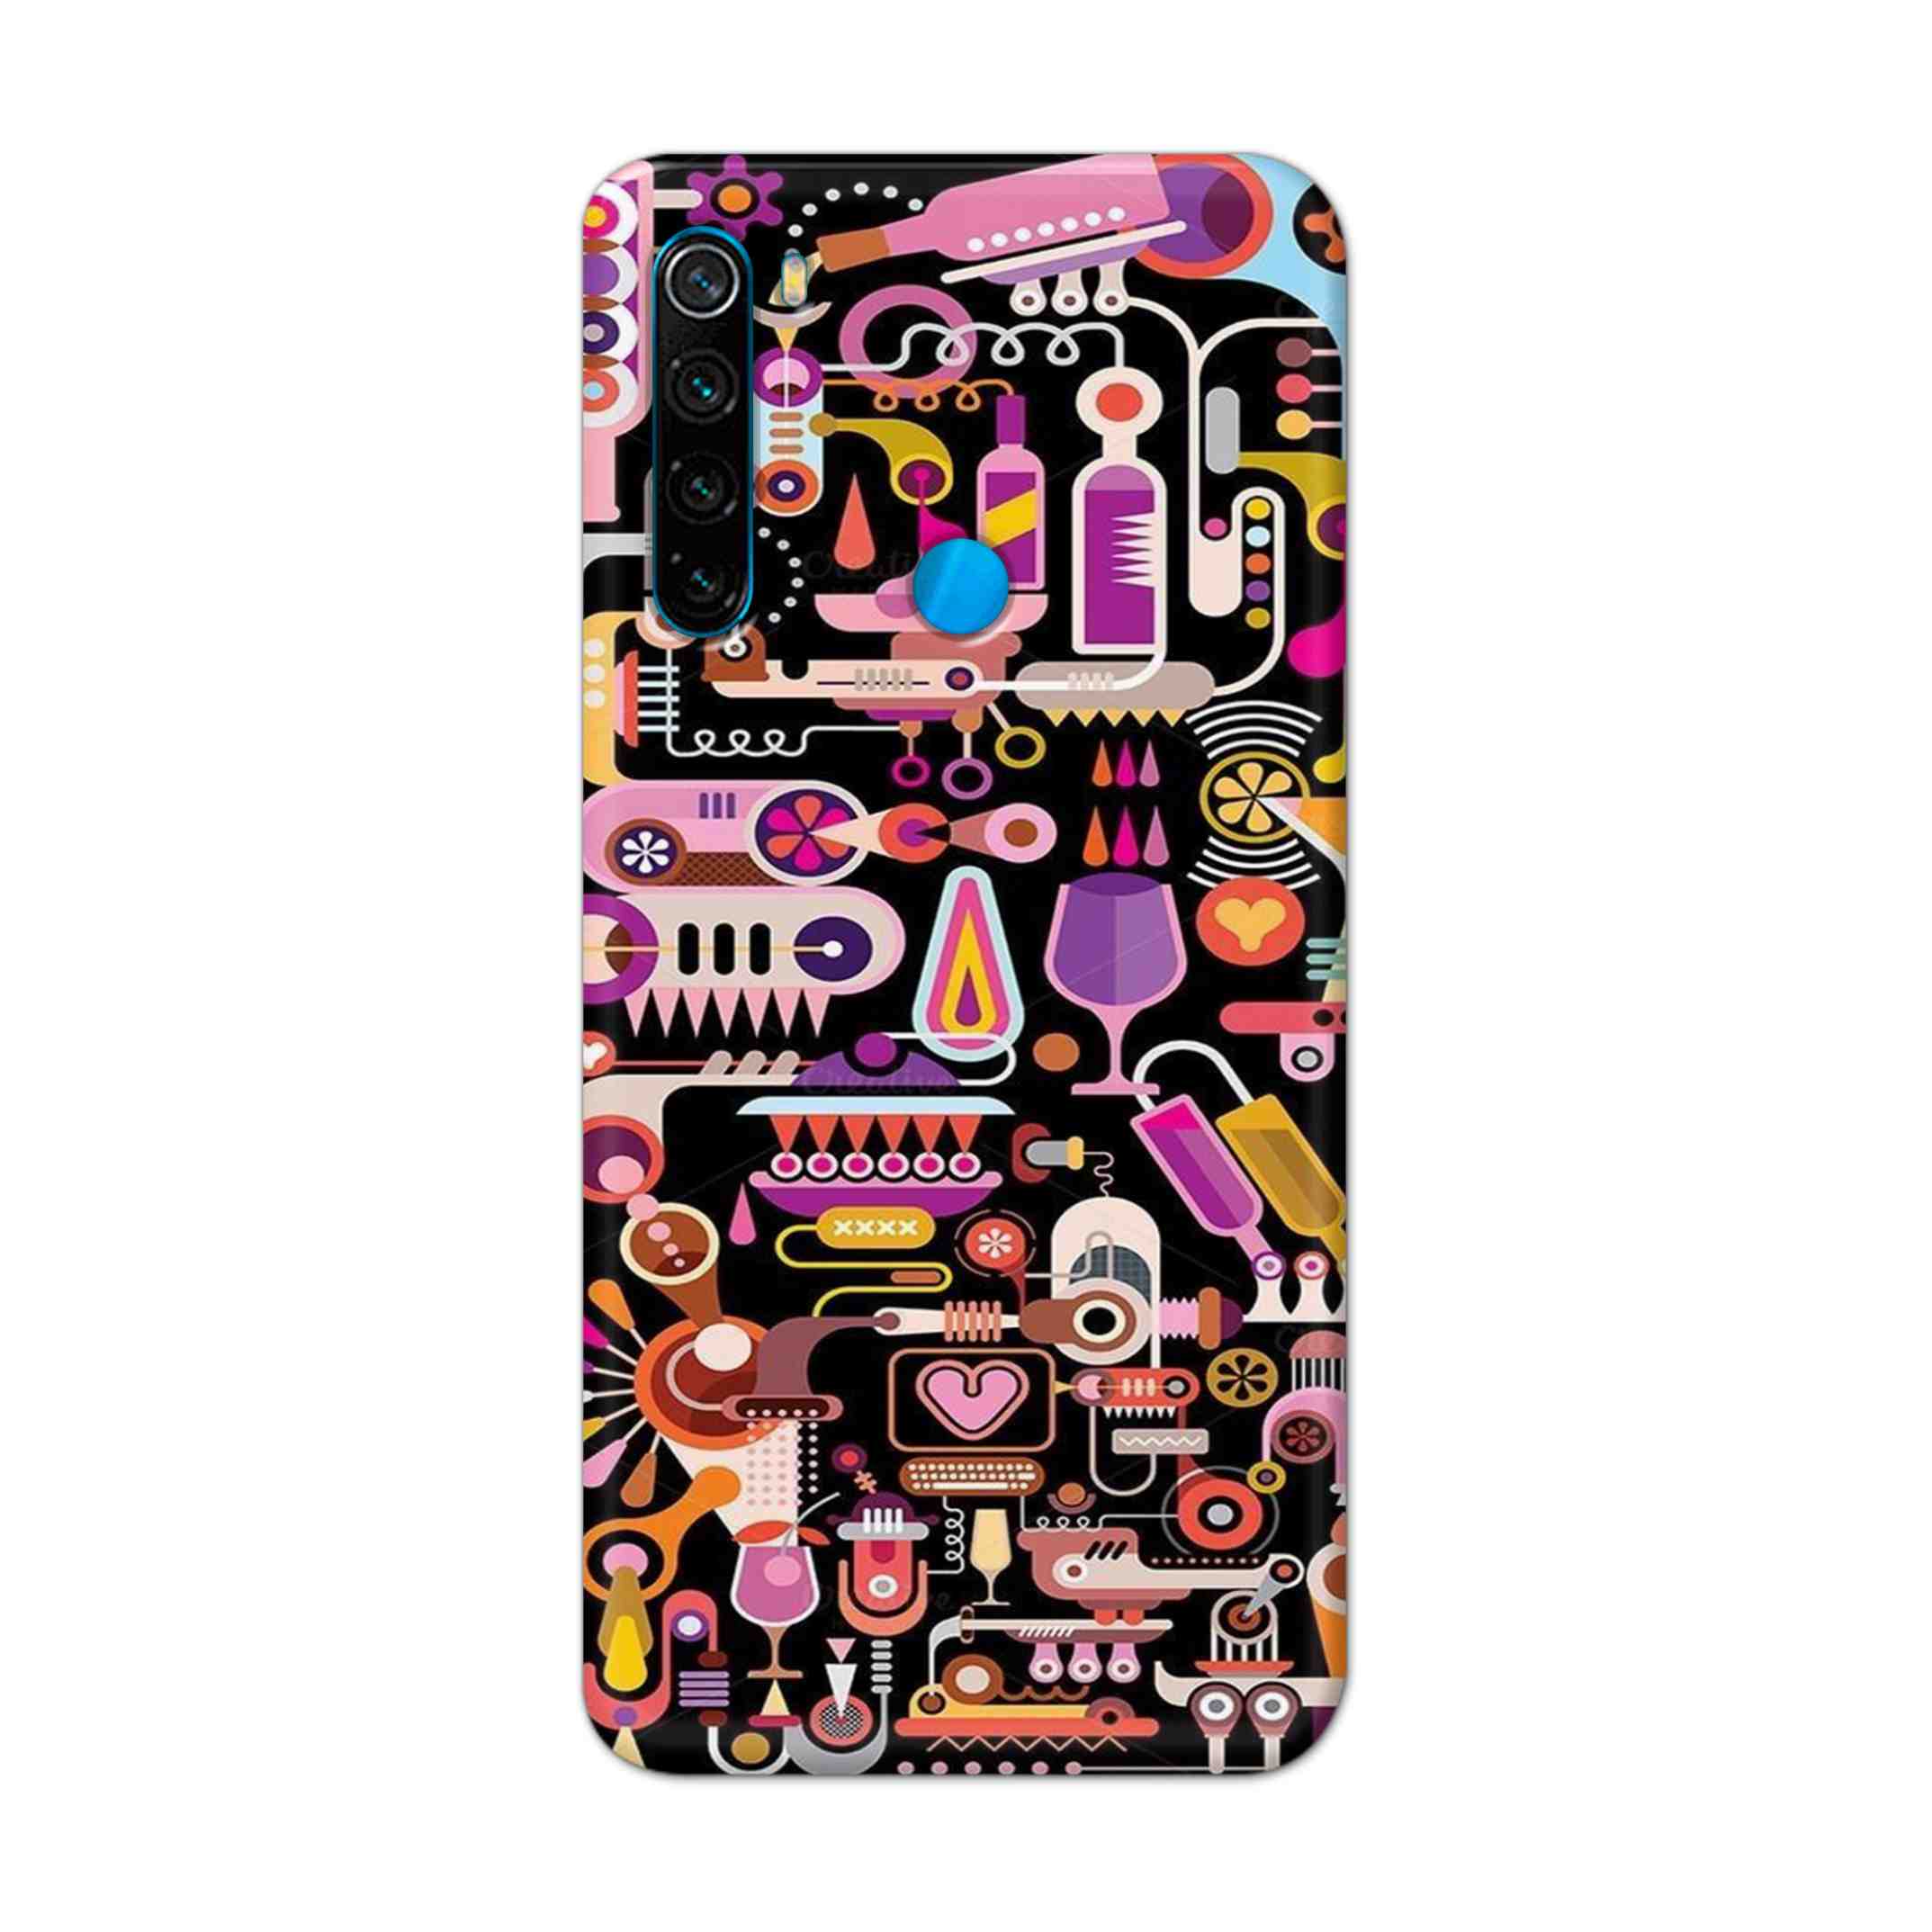 Buy Lab Art Hard Back Mobile Phone Case Cover For Xiaomi Redmi Note 8 Online